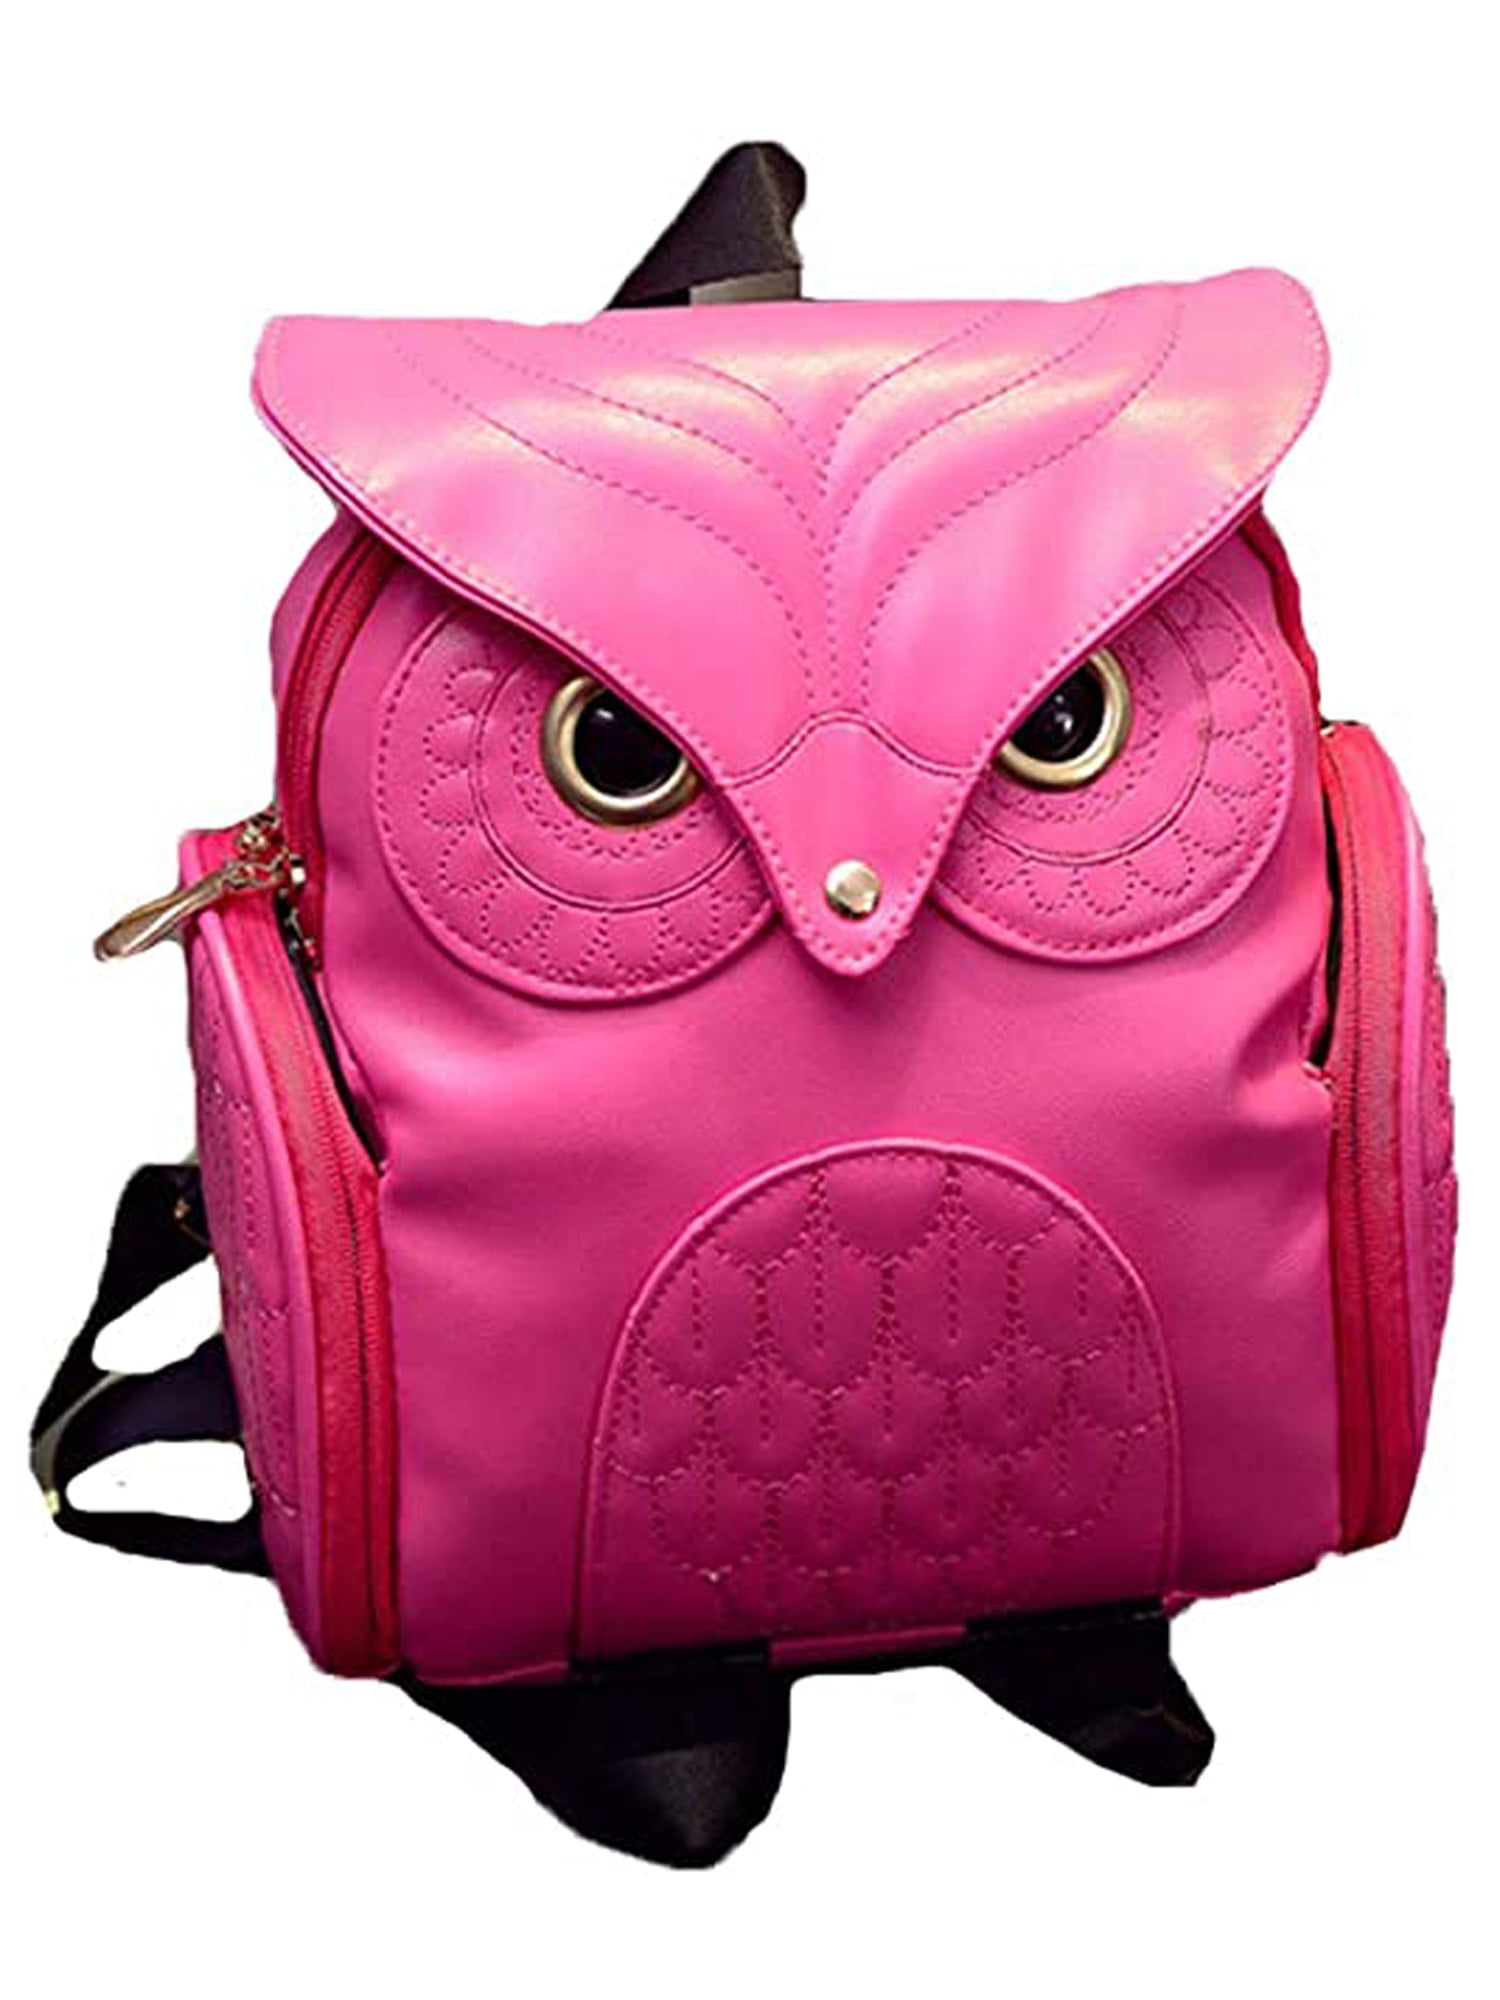 Leather Owls In Winter Hats Purple Backpack Daypack Bag Women